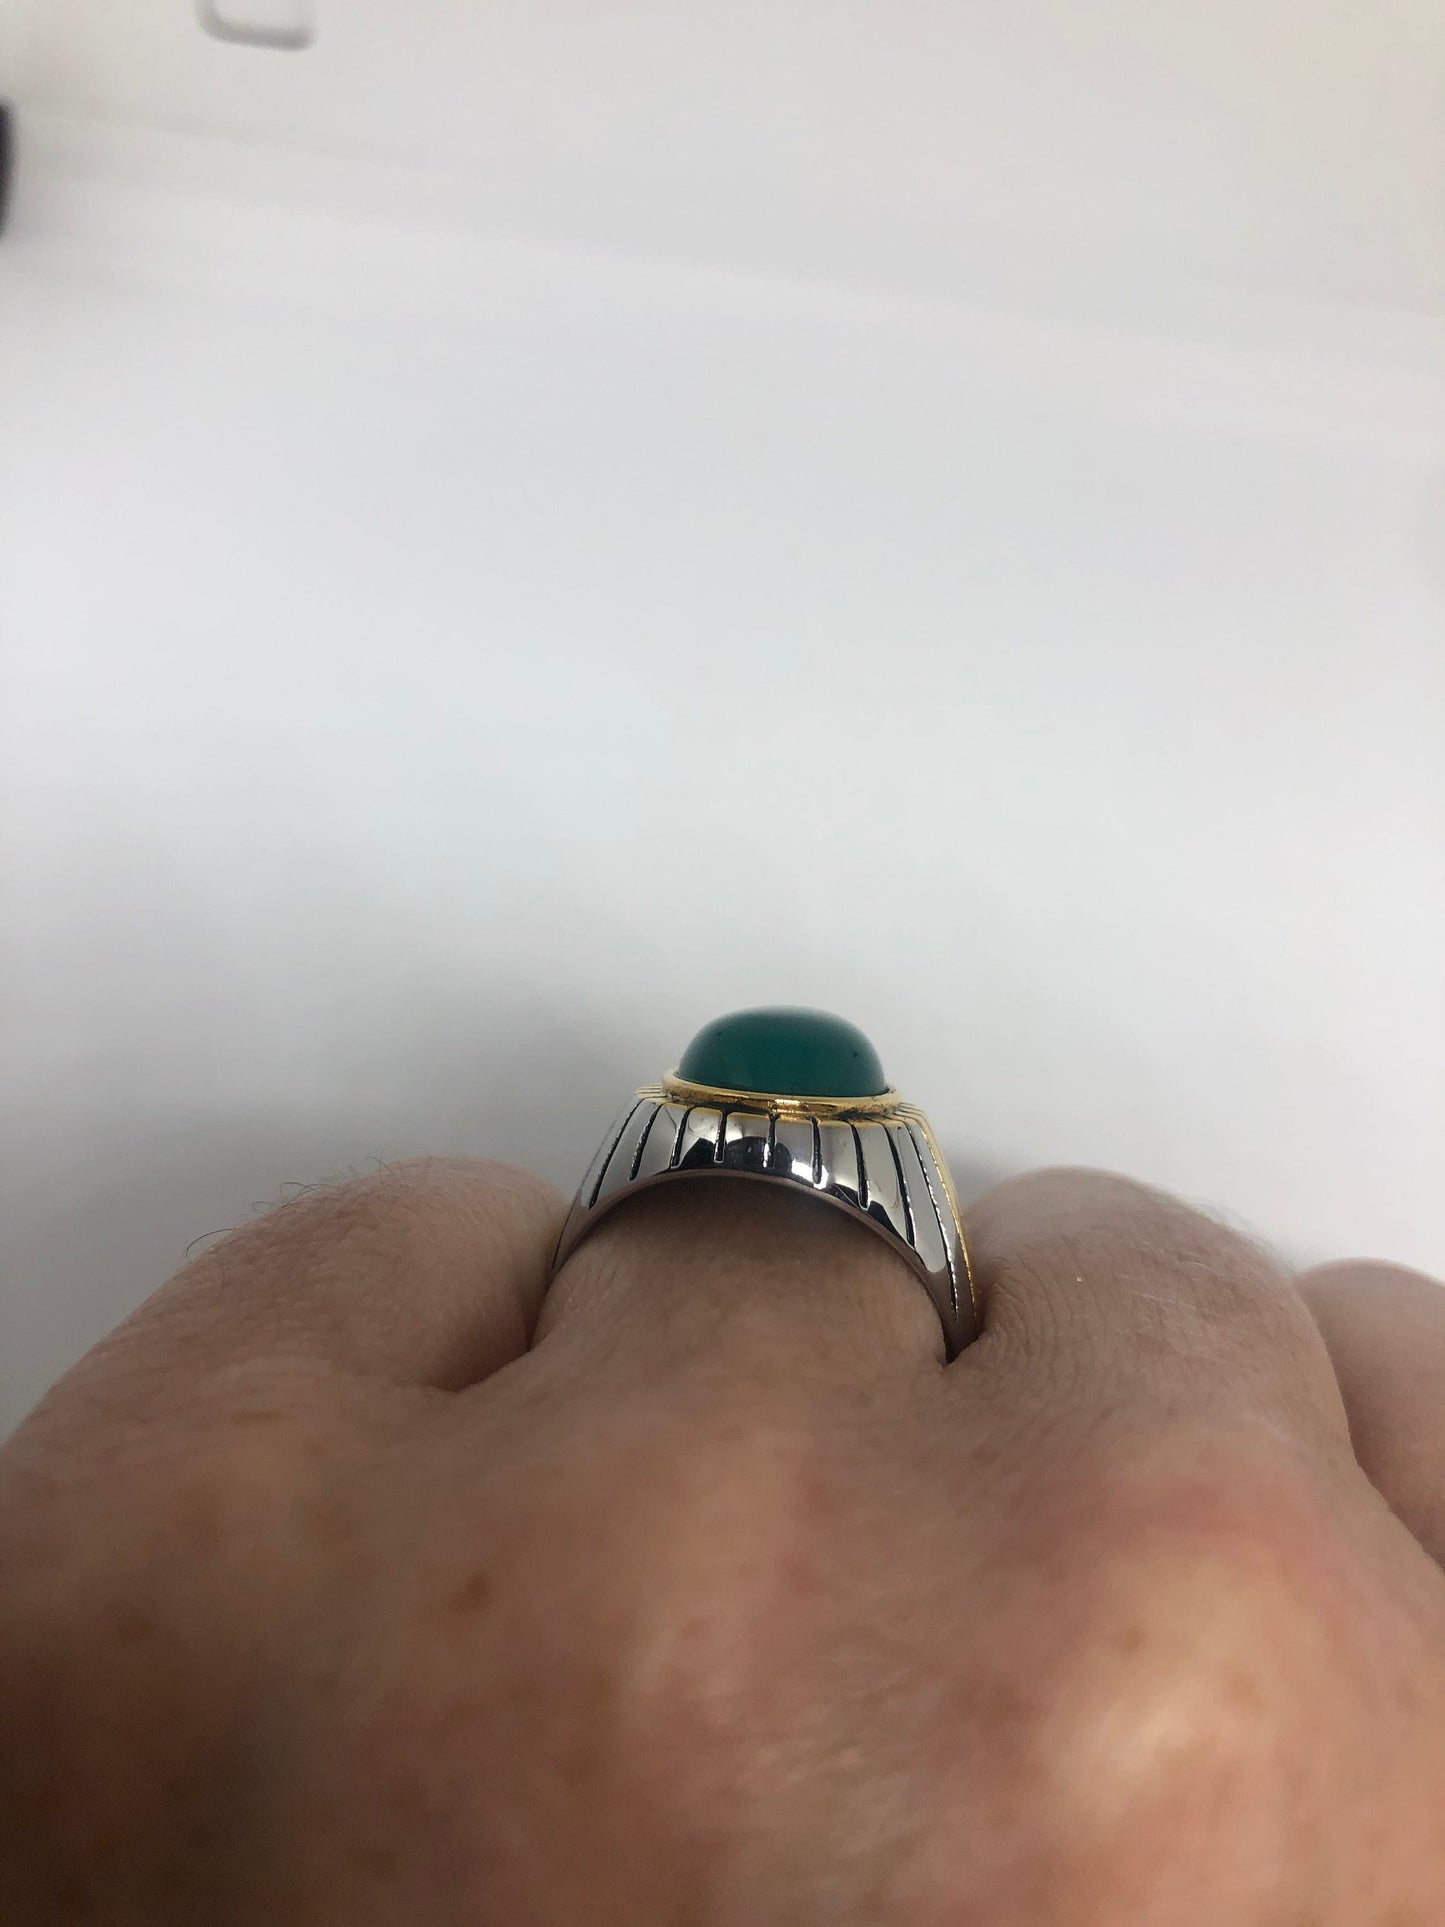 Vintage Gothic Gold Silver Stainless Steel Genuine Green Onyx Mens Ring